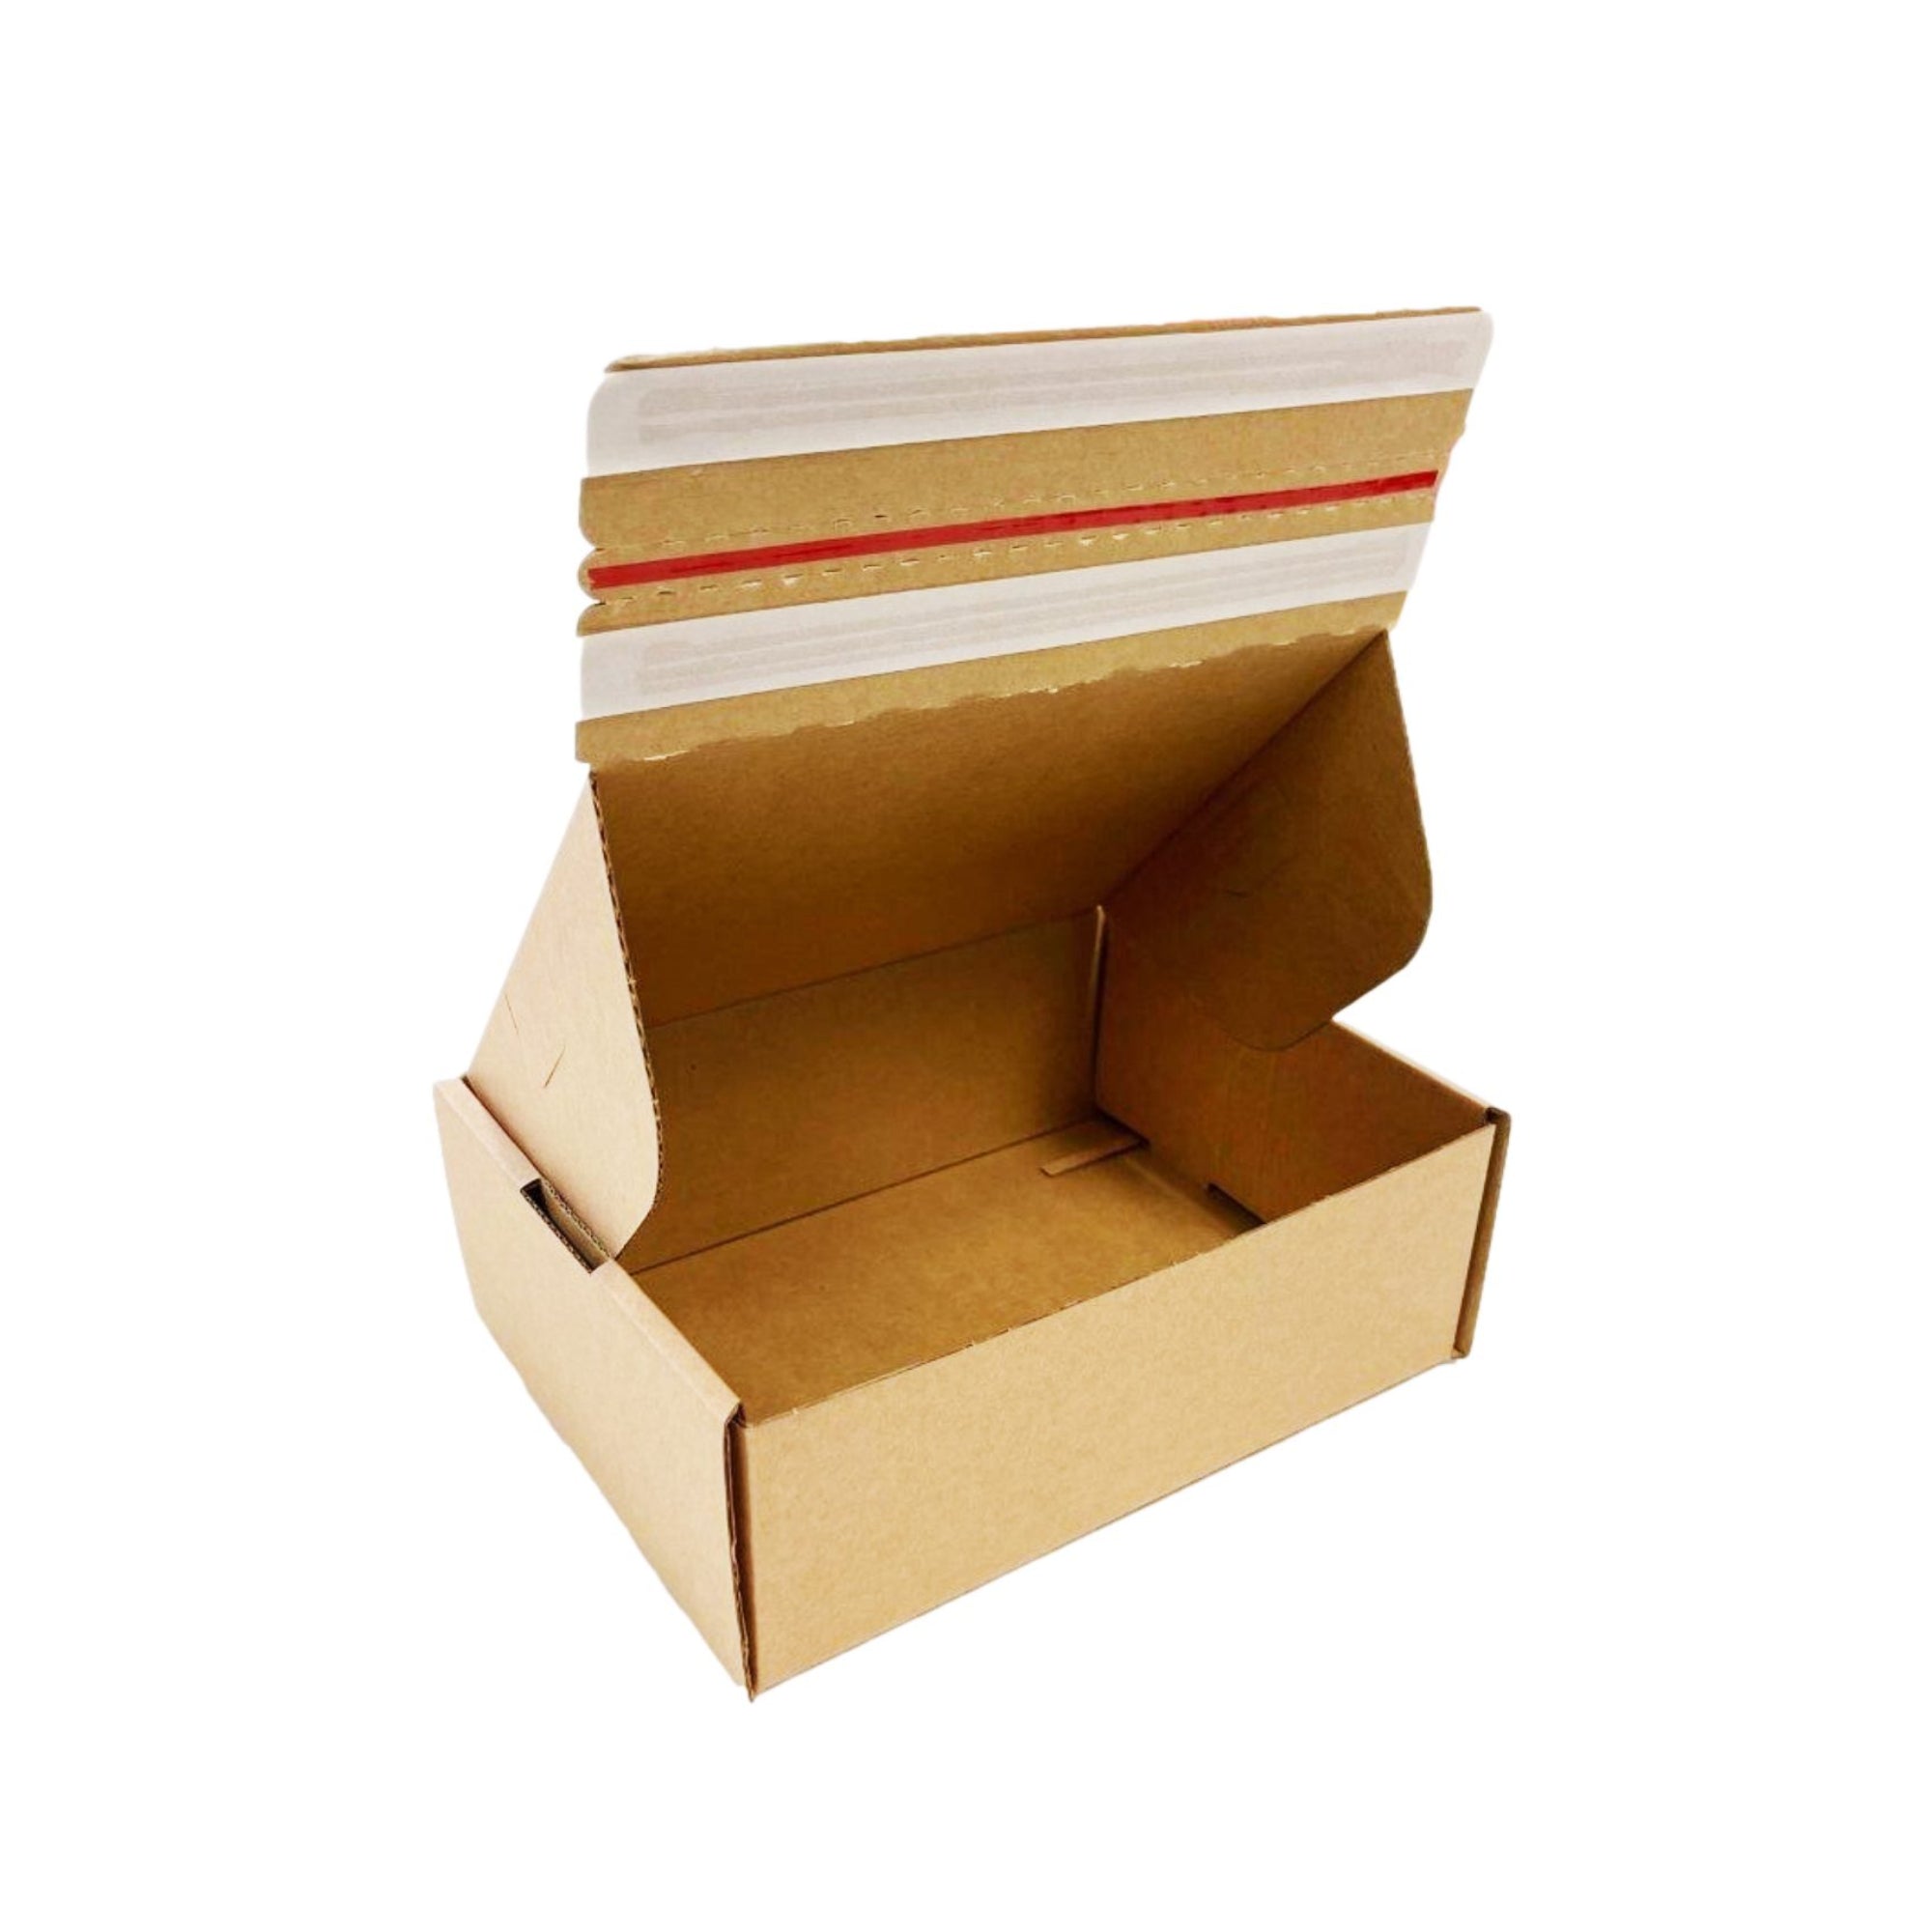 Self Sealing Mailing Boxes, the new way to package and ship in Australian e-Commerce